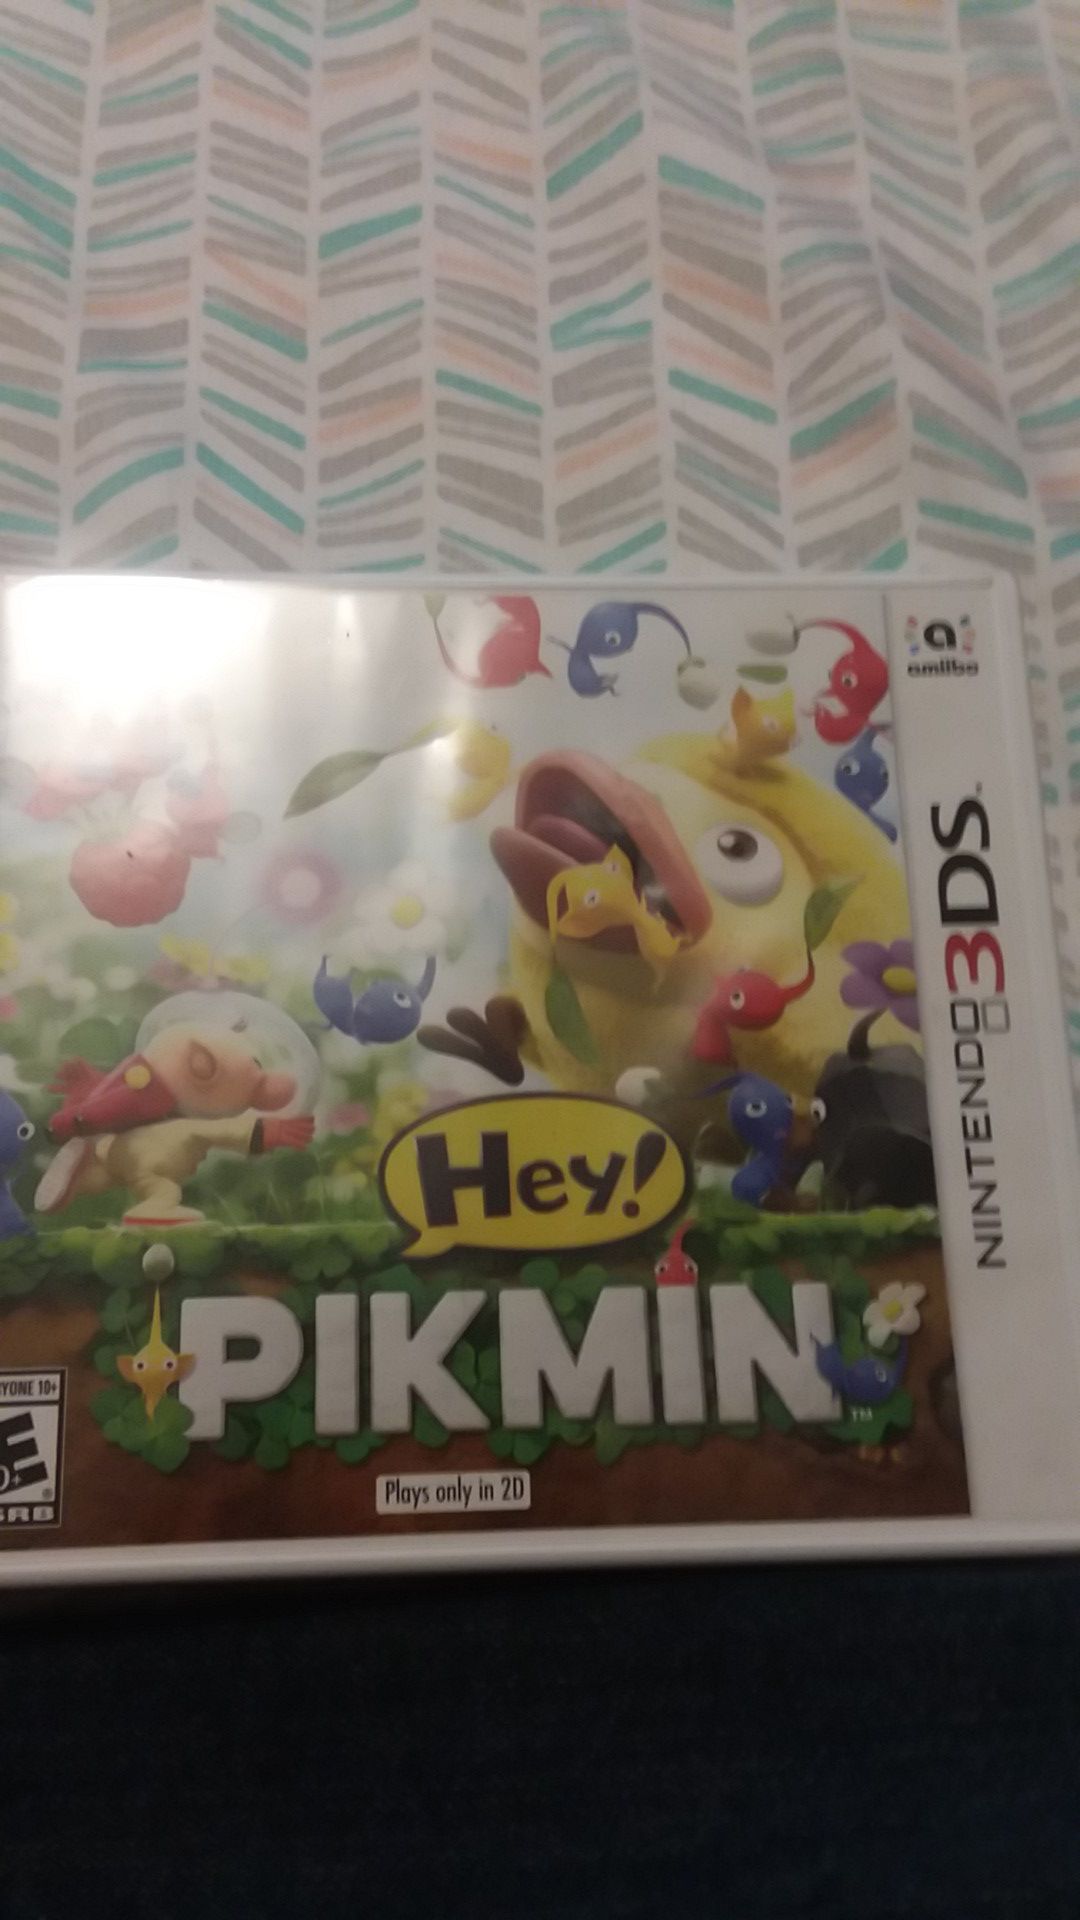 Hey pikmin factory sealed Nintendo 3ds